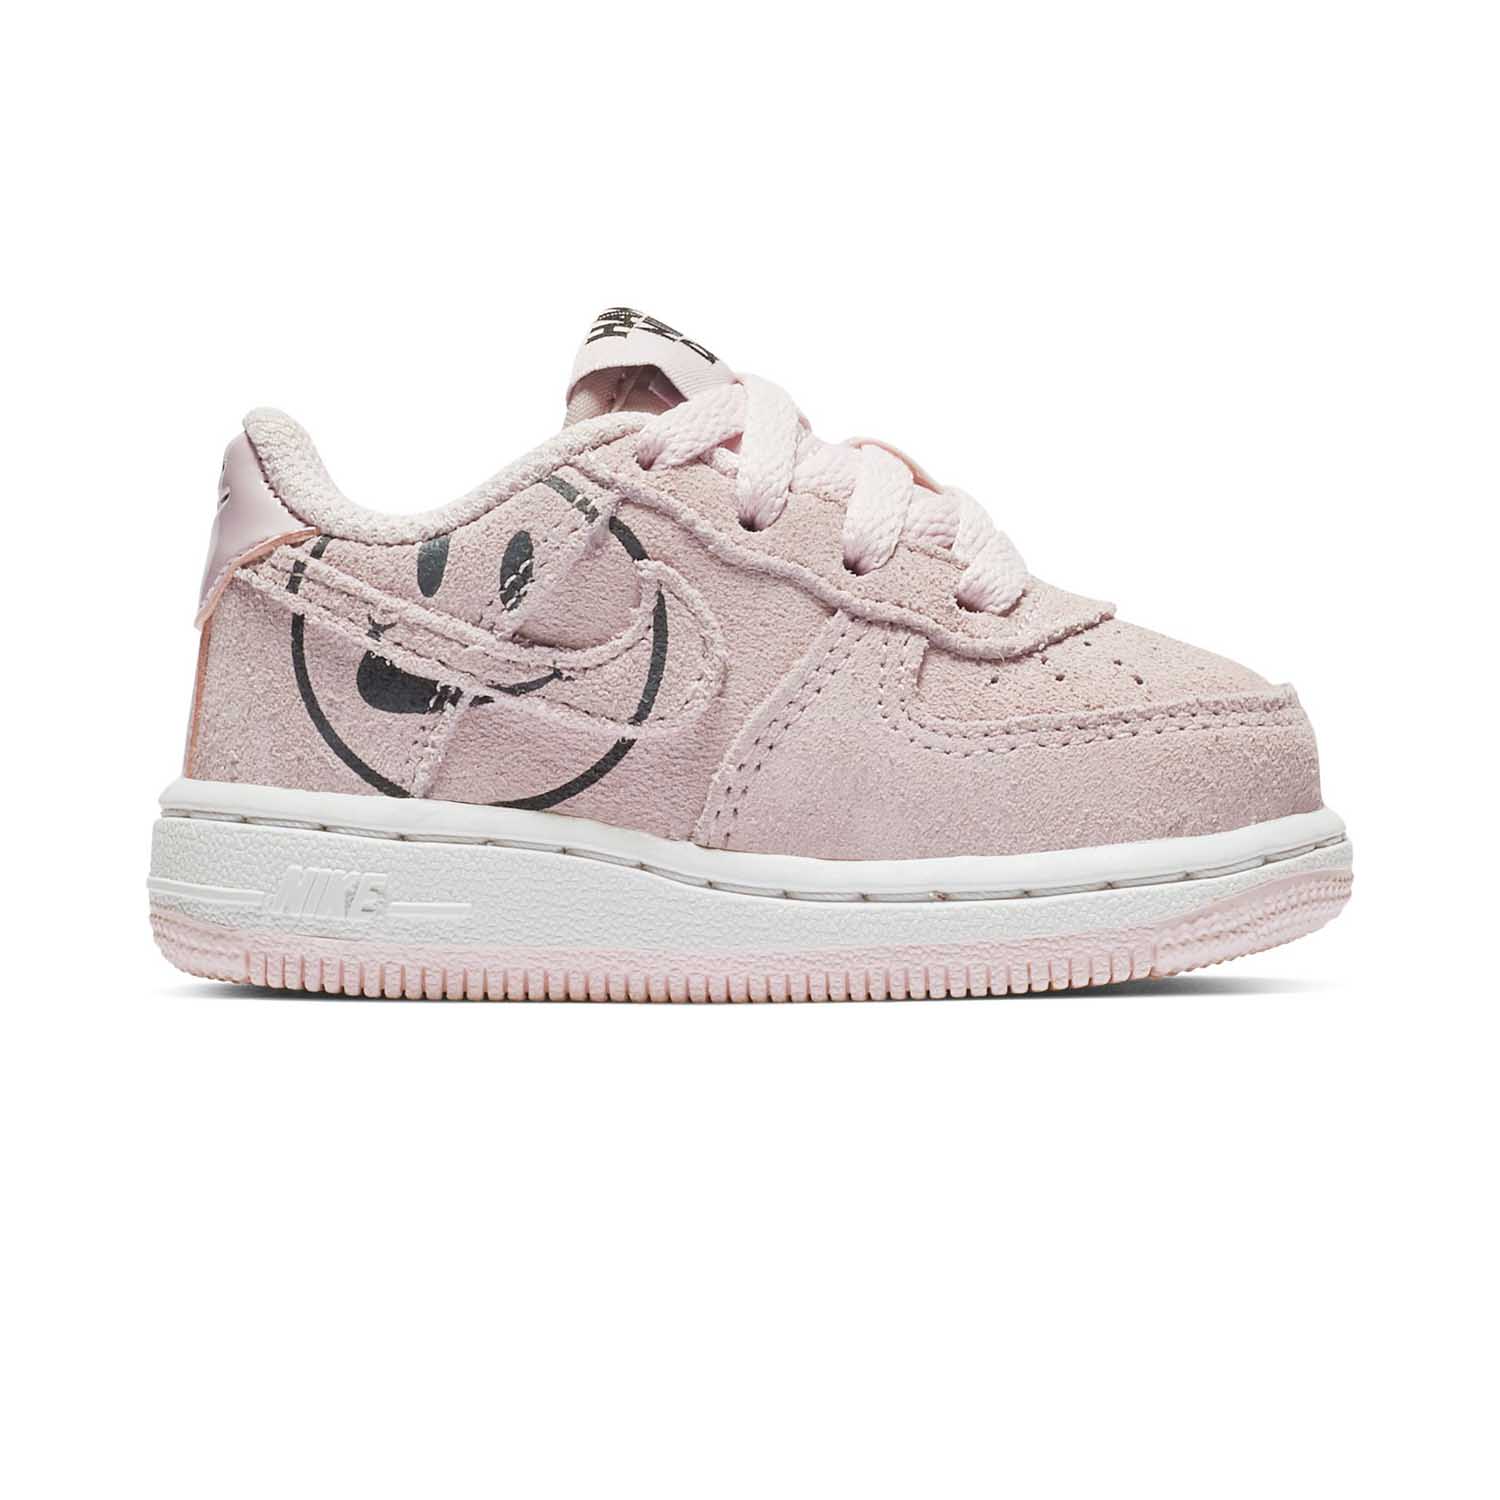 Nike Air Force 1 ‘Have A Nice Day’ LV8 2 I ( BQ8275-600 )